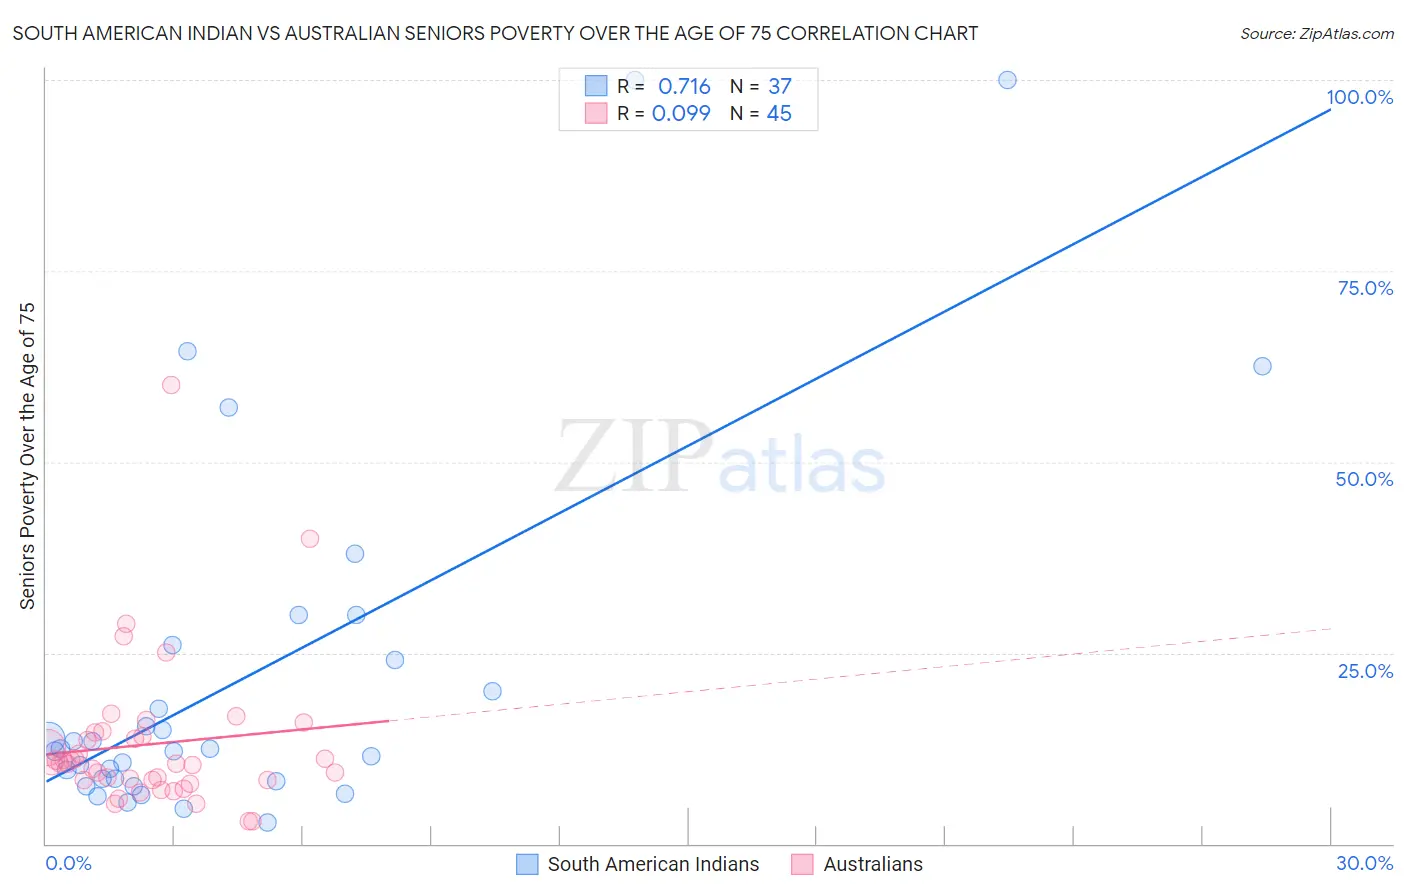 South American Indian vs Australian Seniors Poverty Over the Age of 75